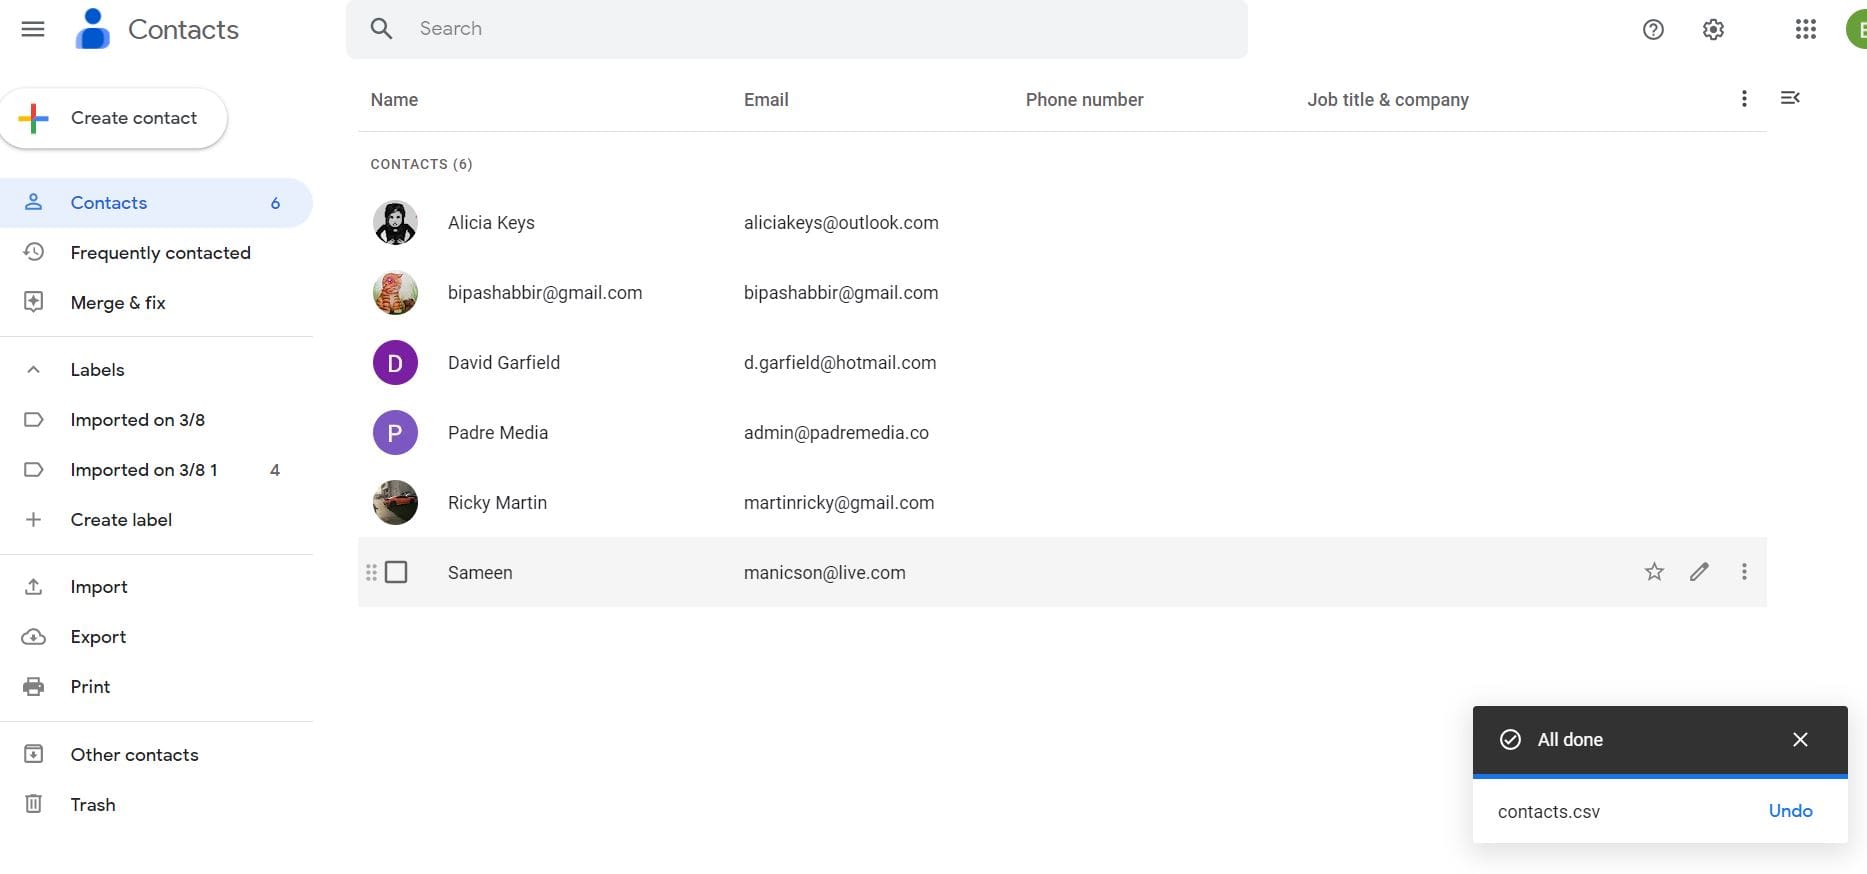 Select Contacts to find all imported Outlook contacts in Gmail